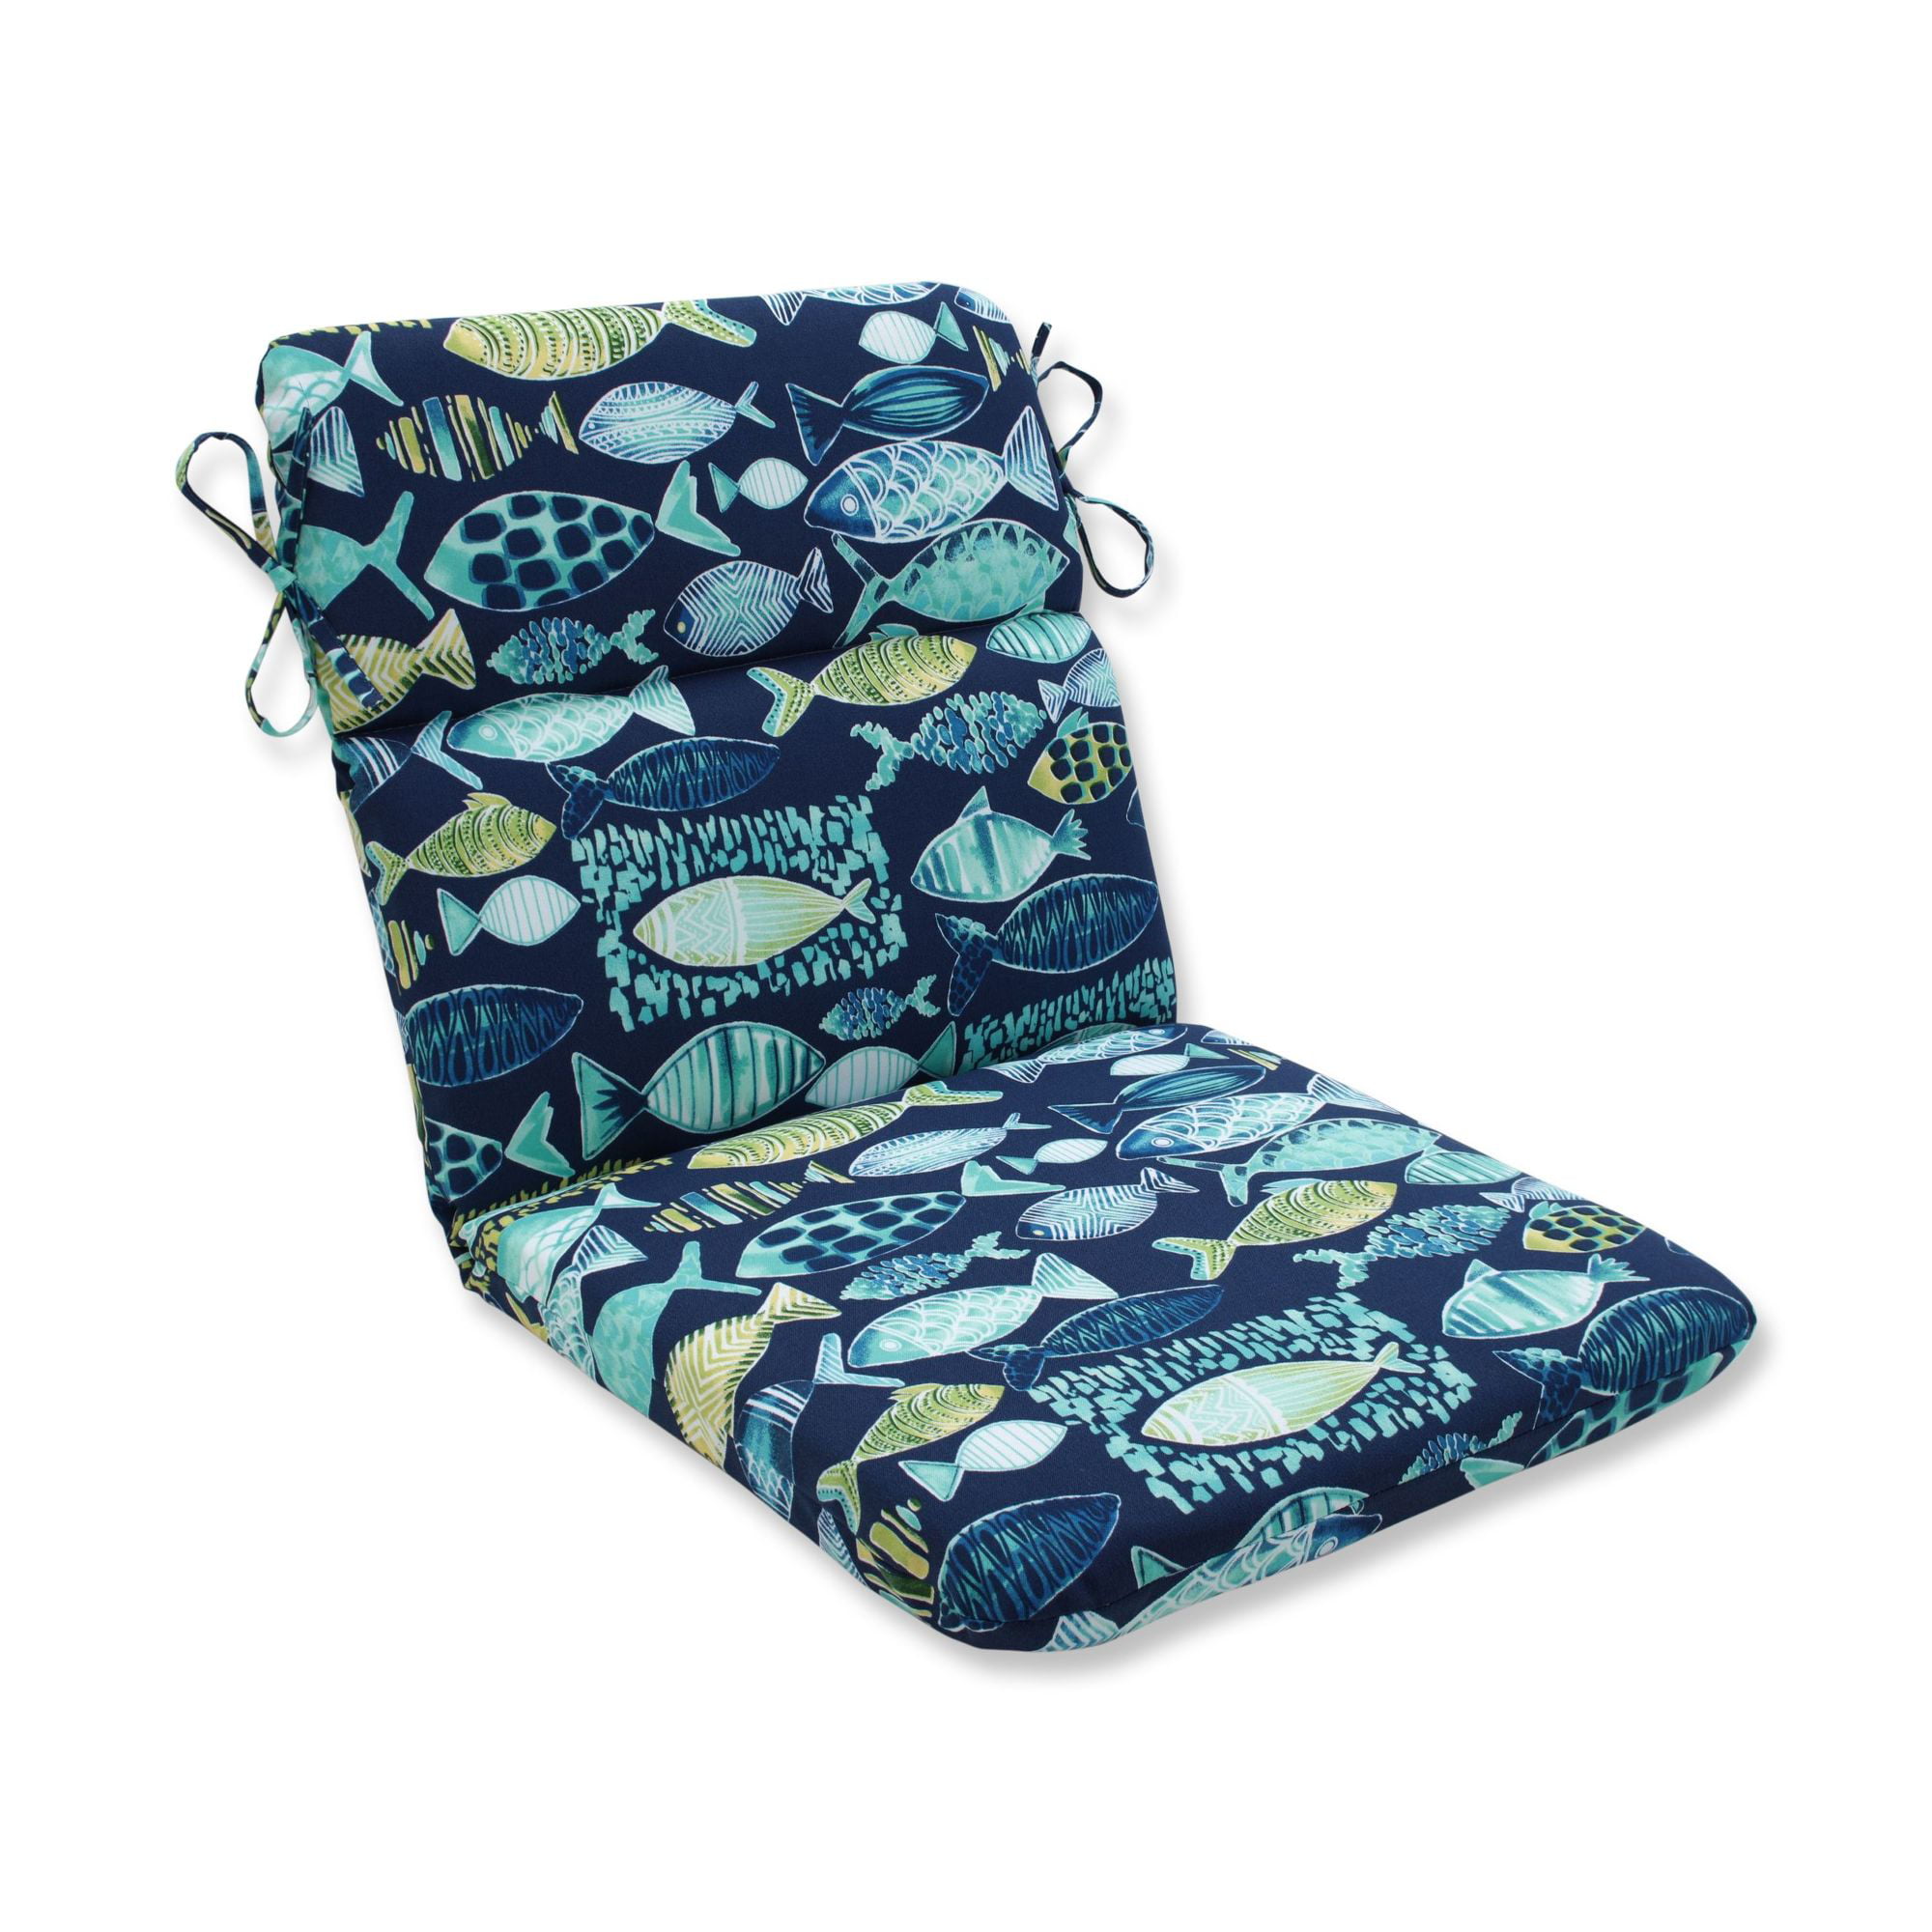 Blue And White Chair Cushions - Best Home Design